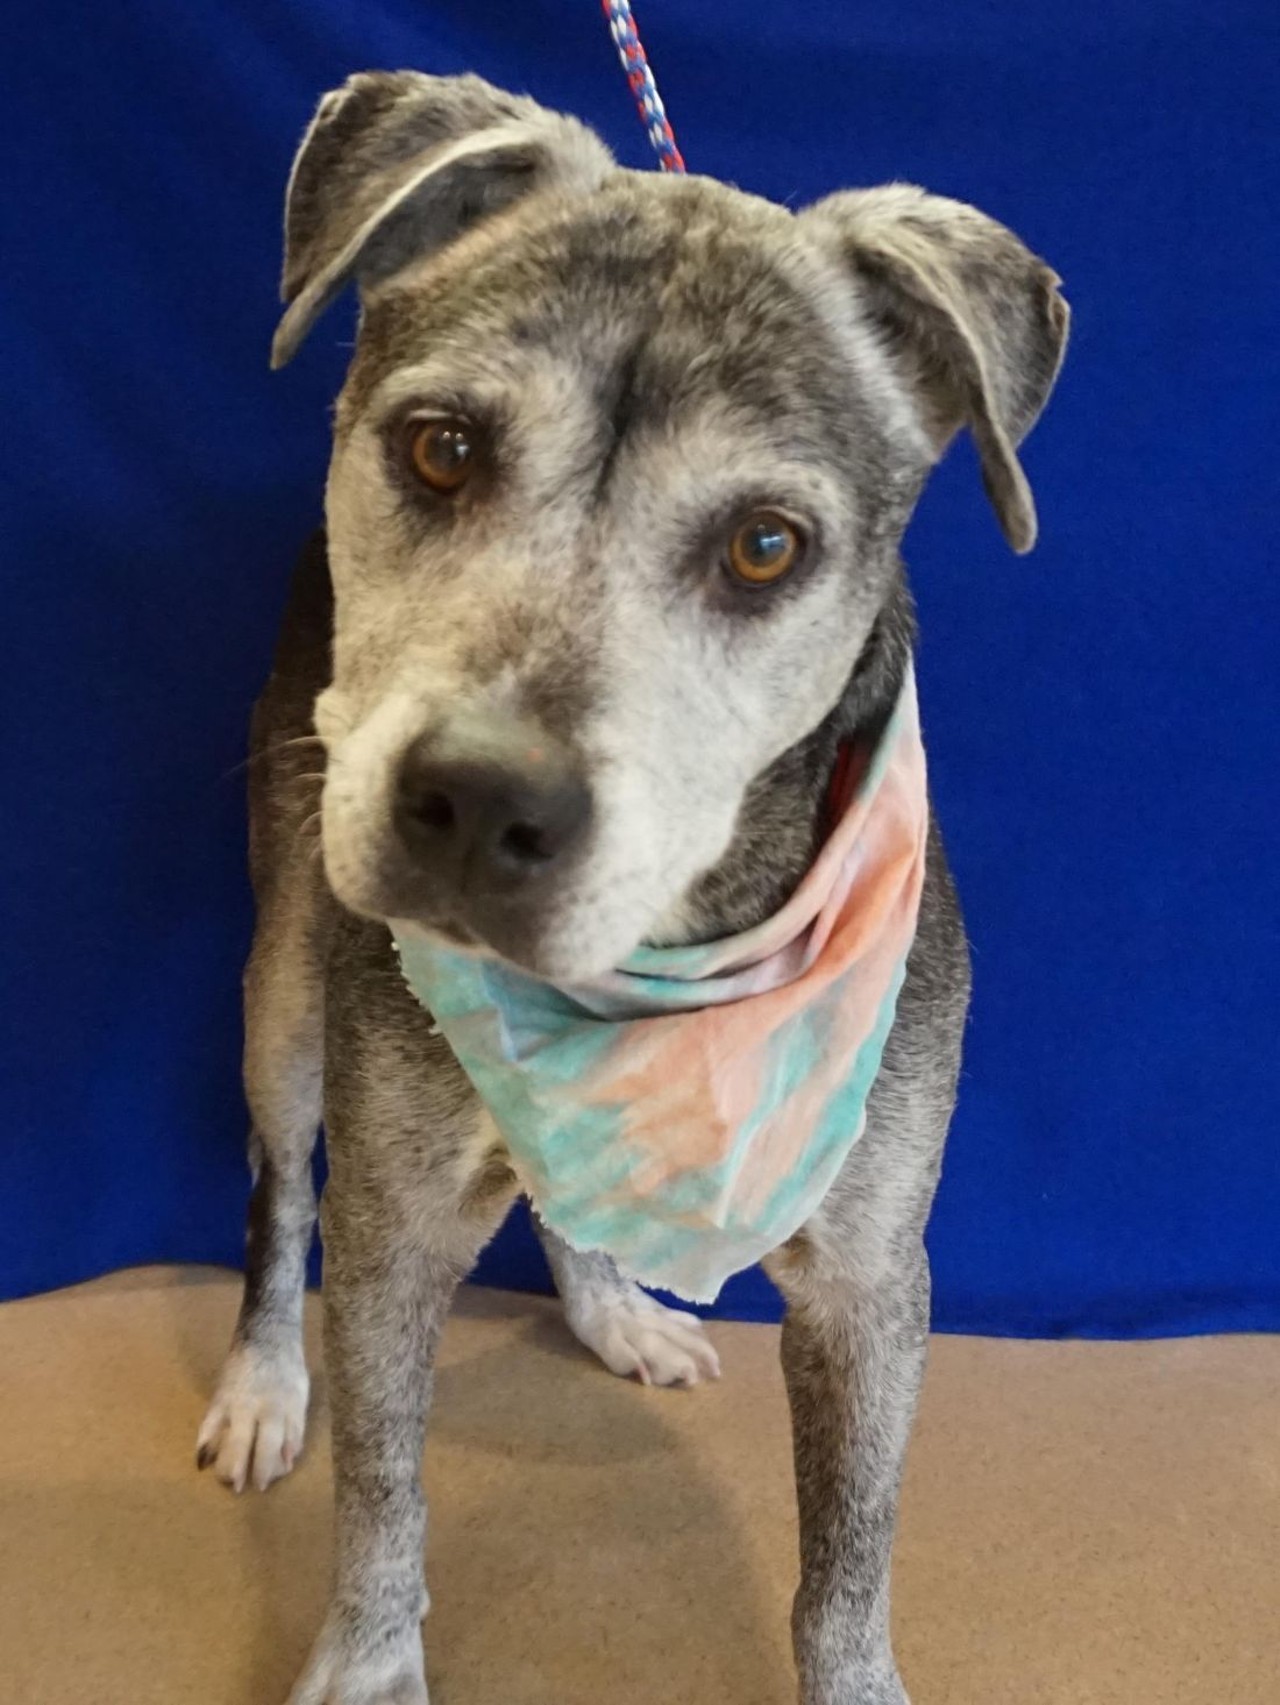 NAME: Sheba
GENDER: Female
BREED: Pit Bull Terrier
AGE: 9 years
WEIGHT: 58 pounds
SPECIAL CONSIDERATIONS: None
REASON I CAME TO MHS: Owner fell ill
LOCATION: Rochester Hills Center for Animal Care
ID NUMBER: 862532